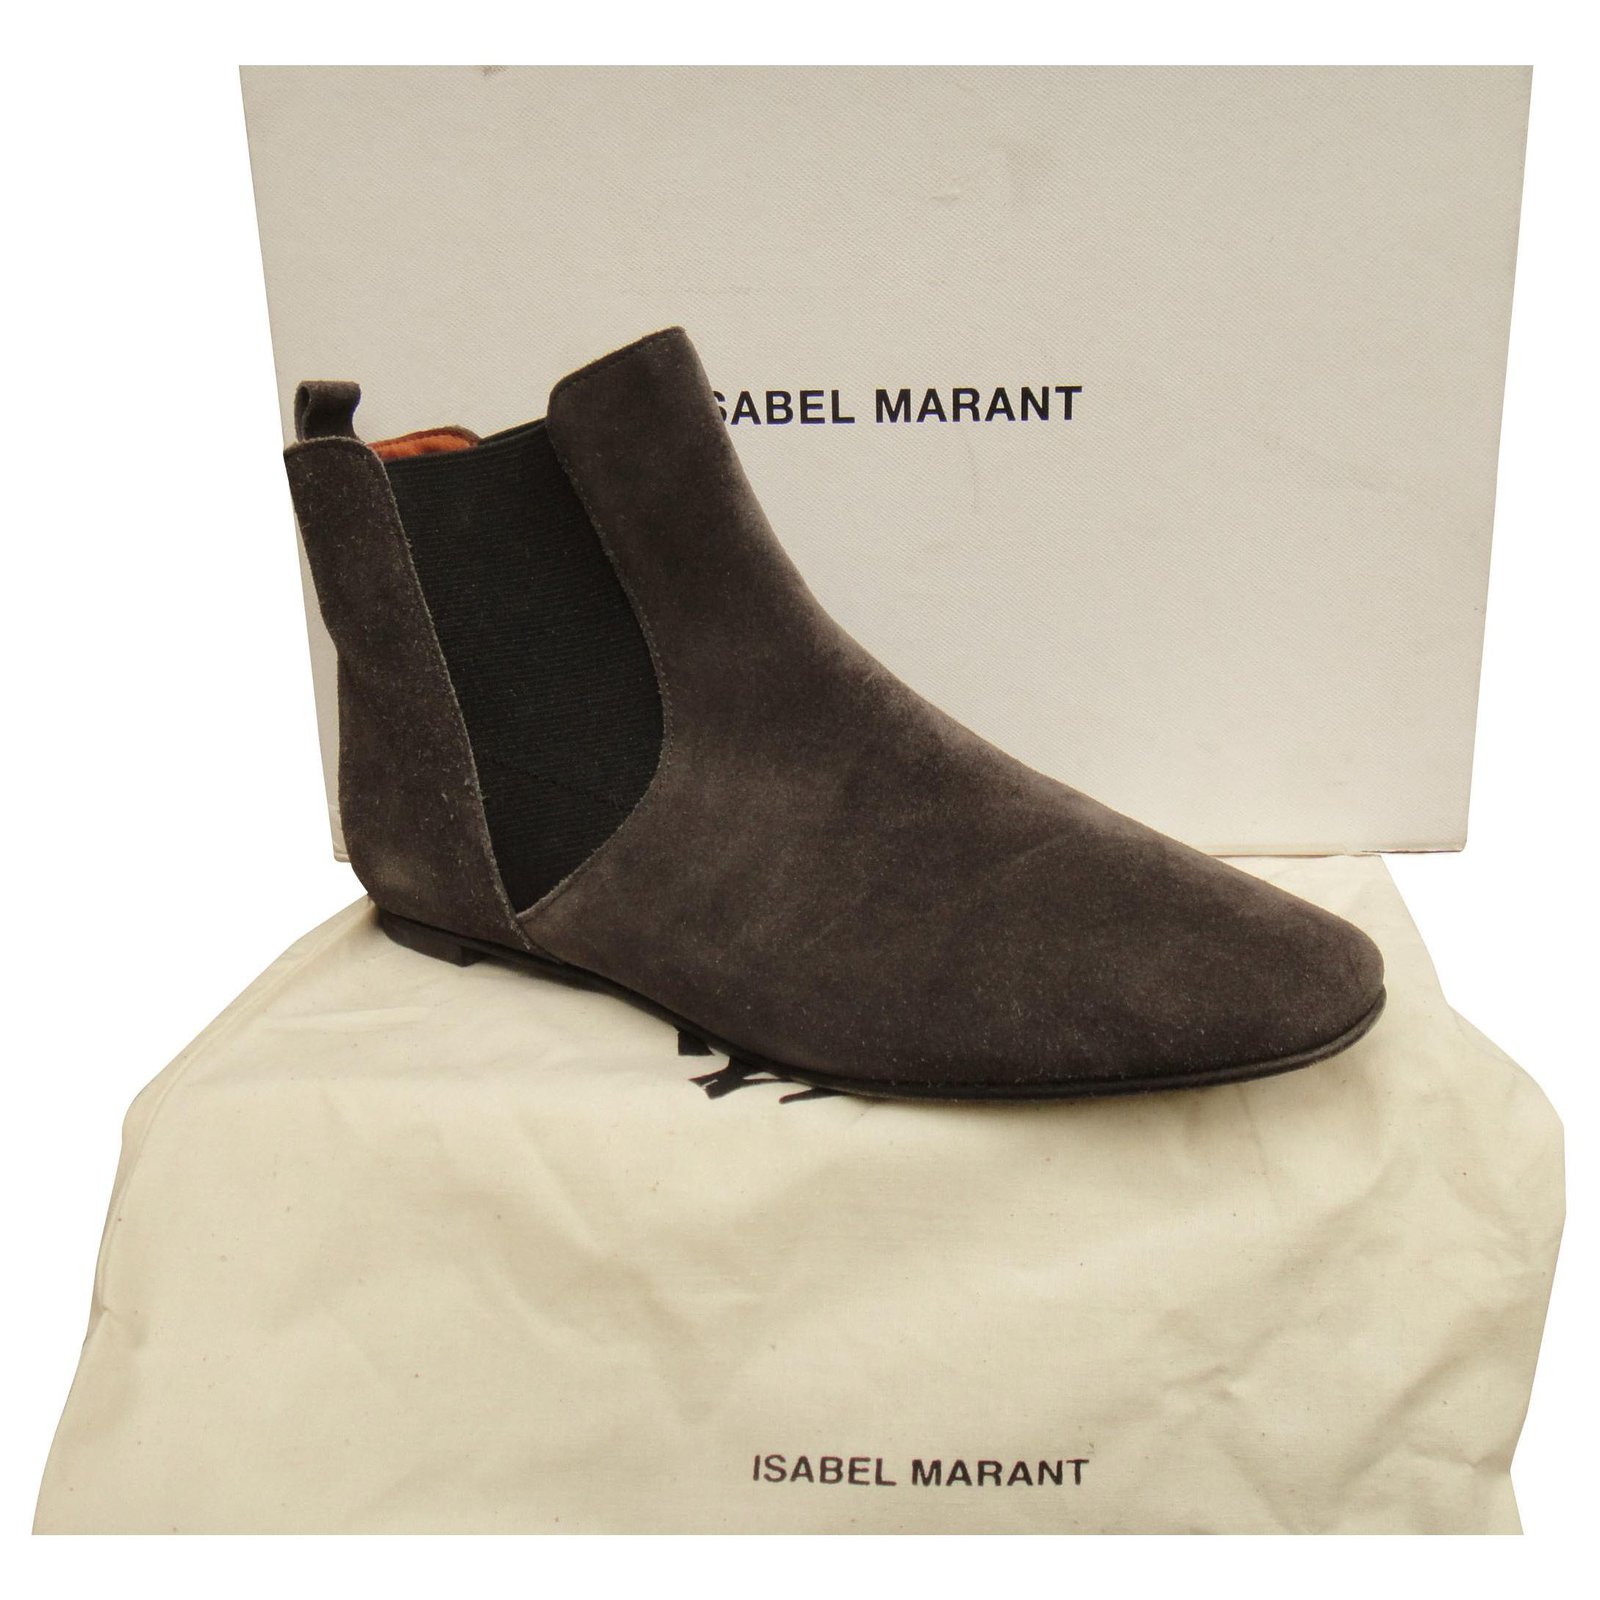 Isabel Marant Isabel Marant Boots Size 38 Perfect Condition Ankle Boots Deerskin Grey Ref Joli Closet